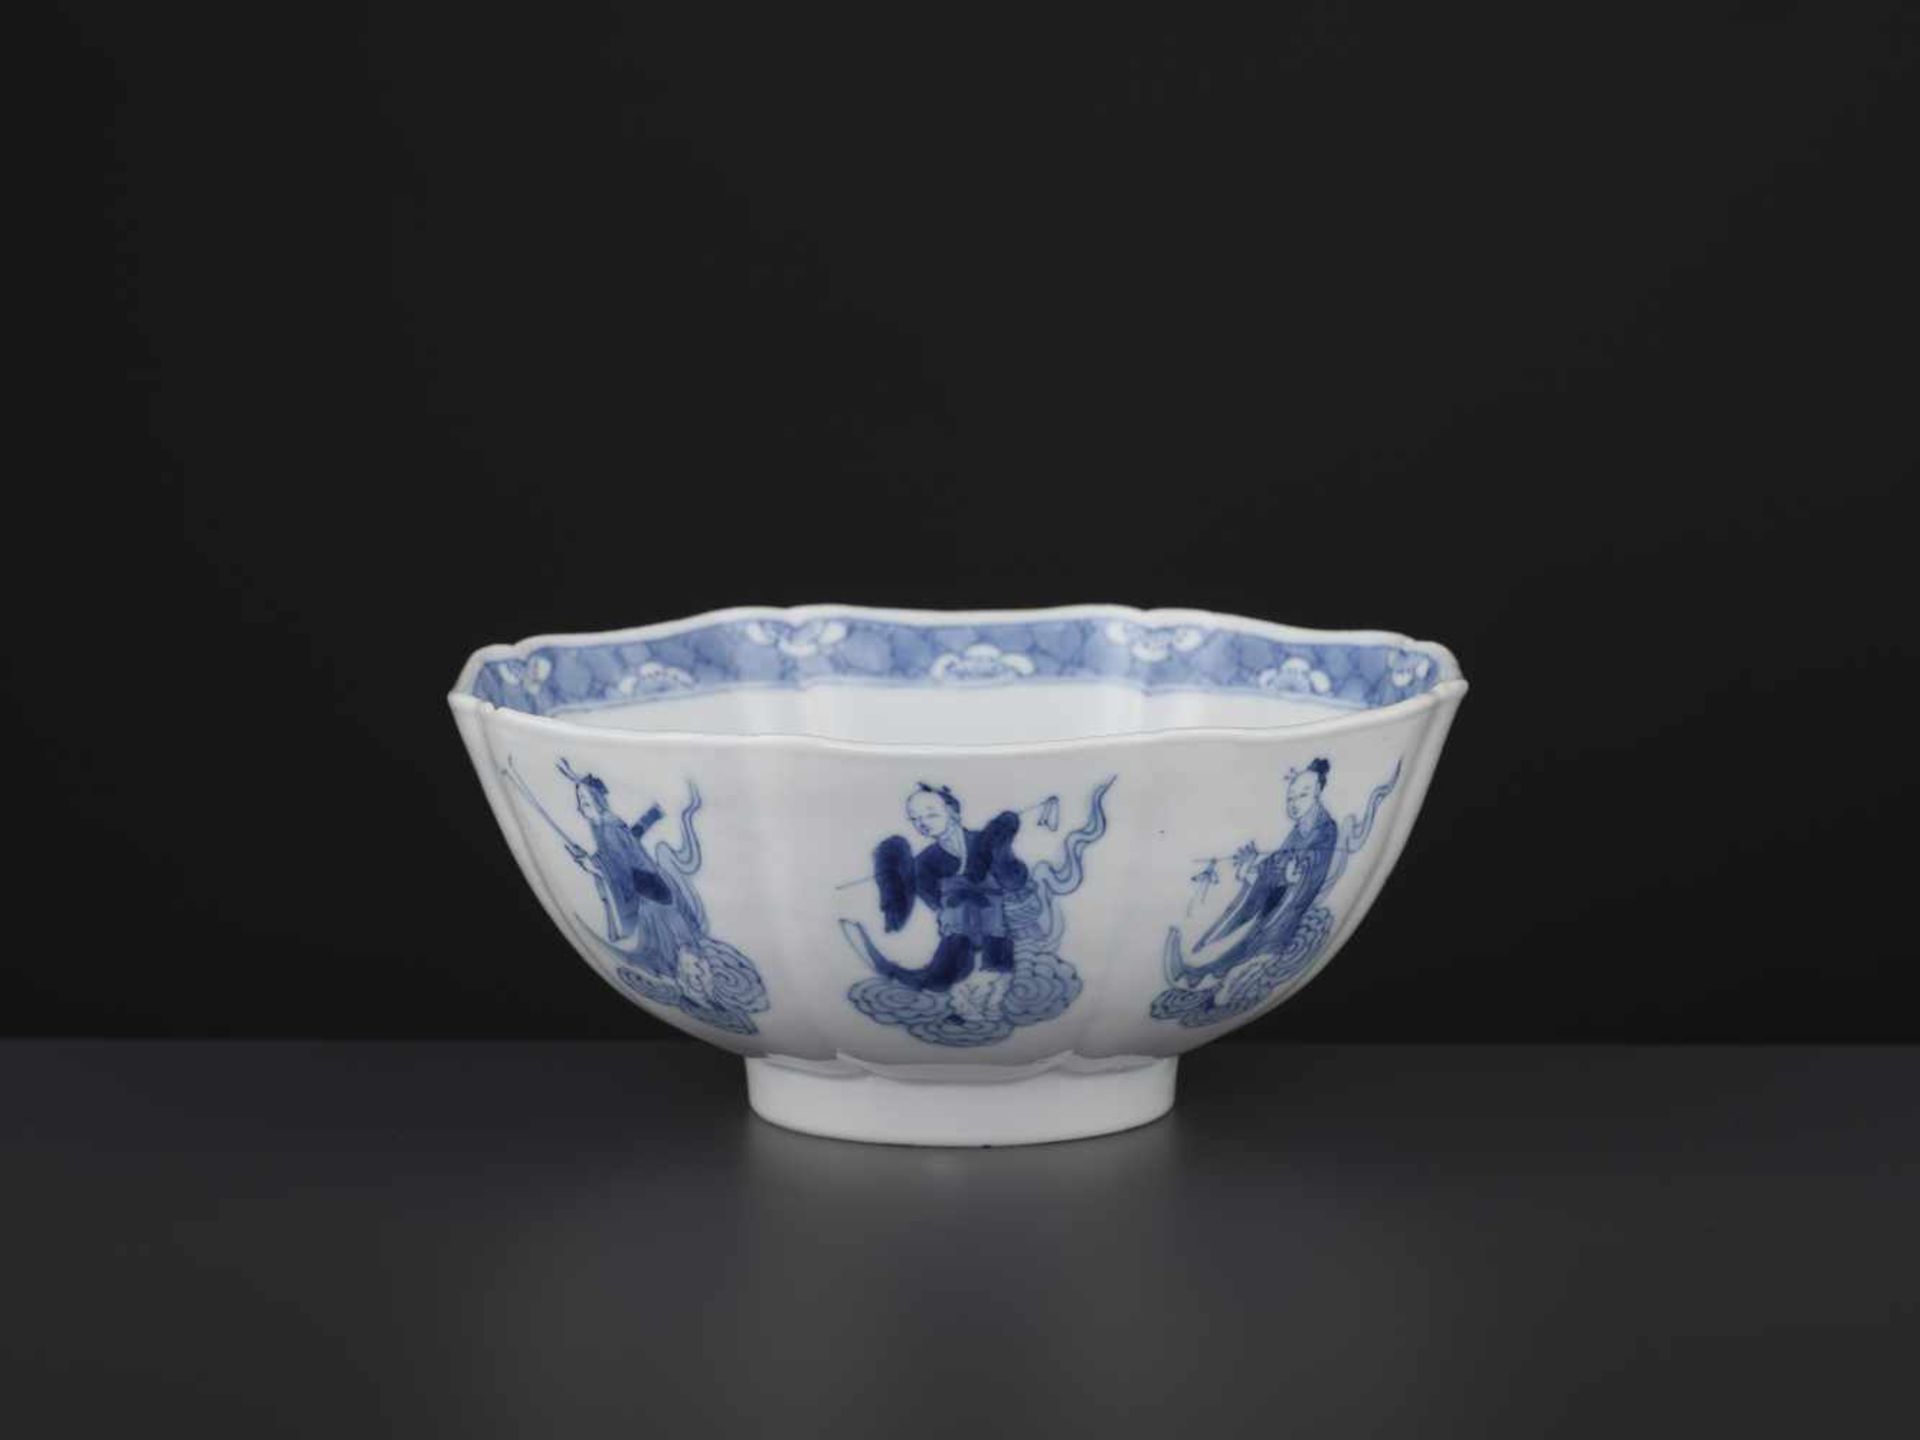 A KANGXI IMMORTALS BOWLChina, 1662-1722. The eight-lobed vessel neatly painted in cobalt blue